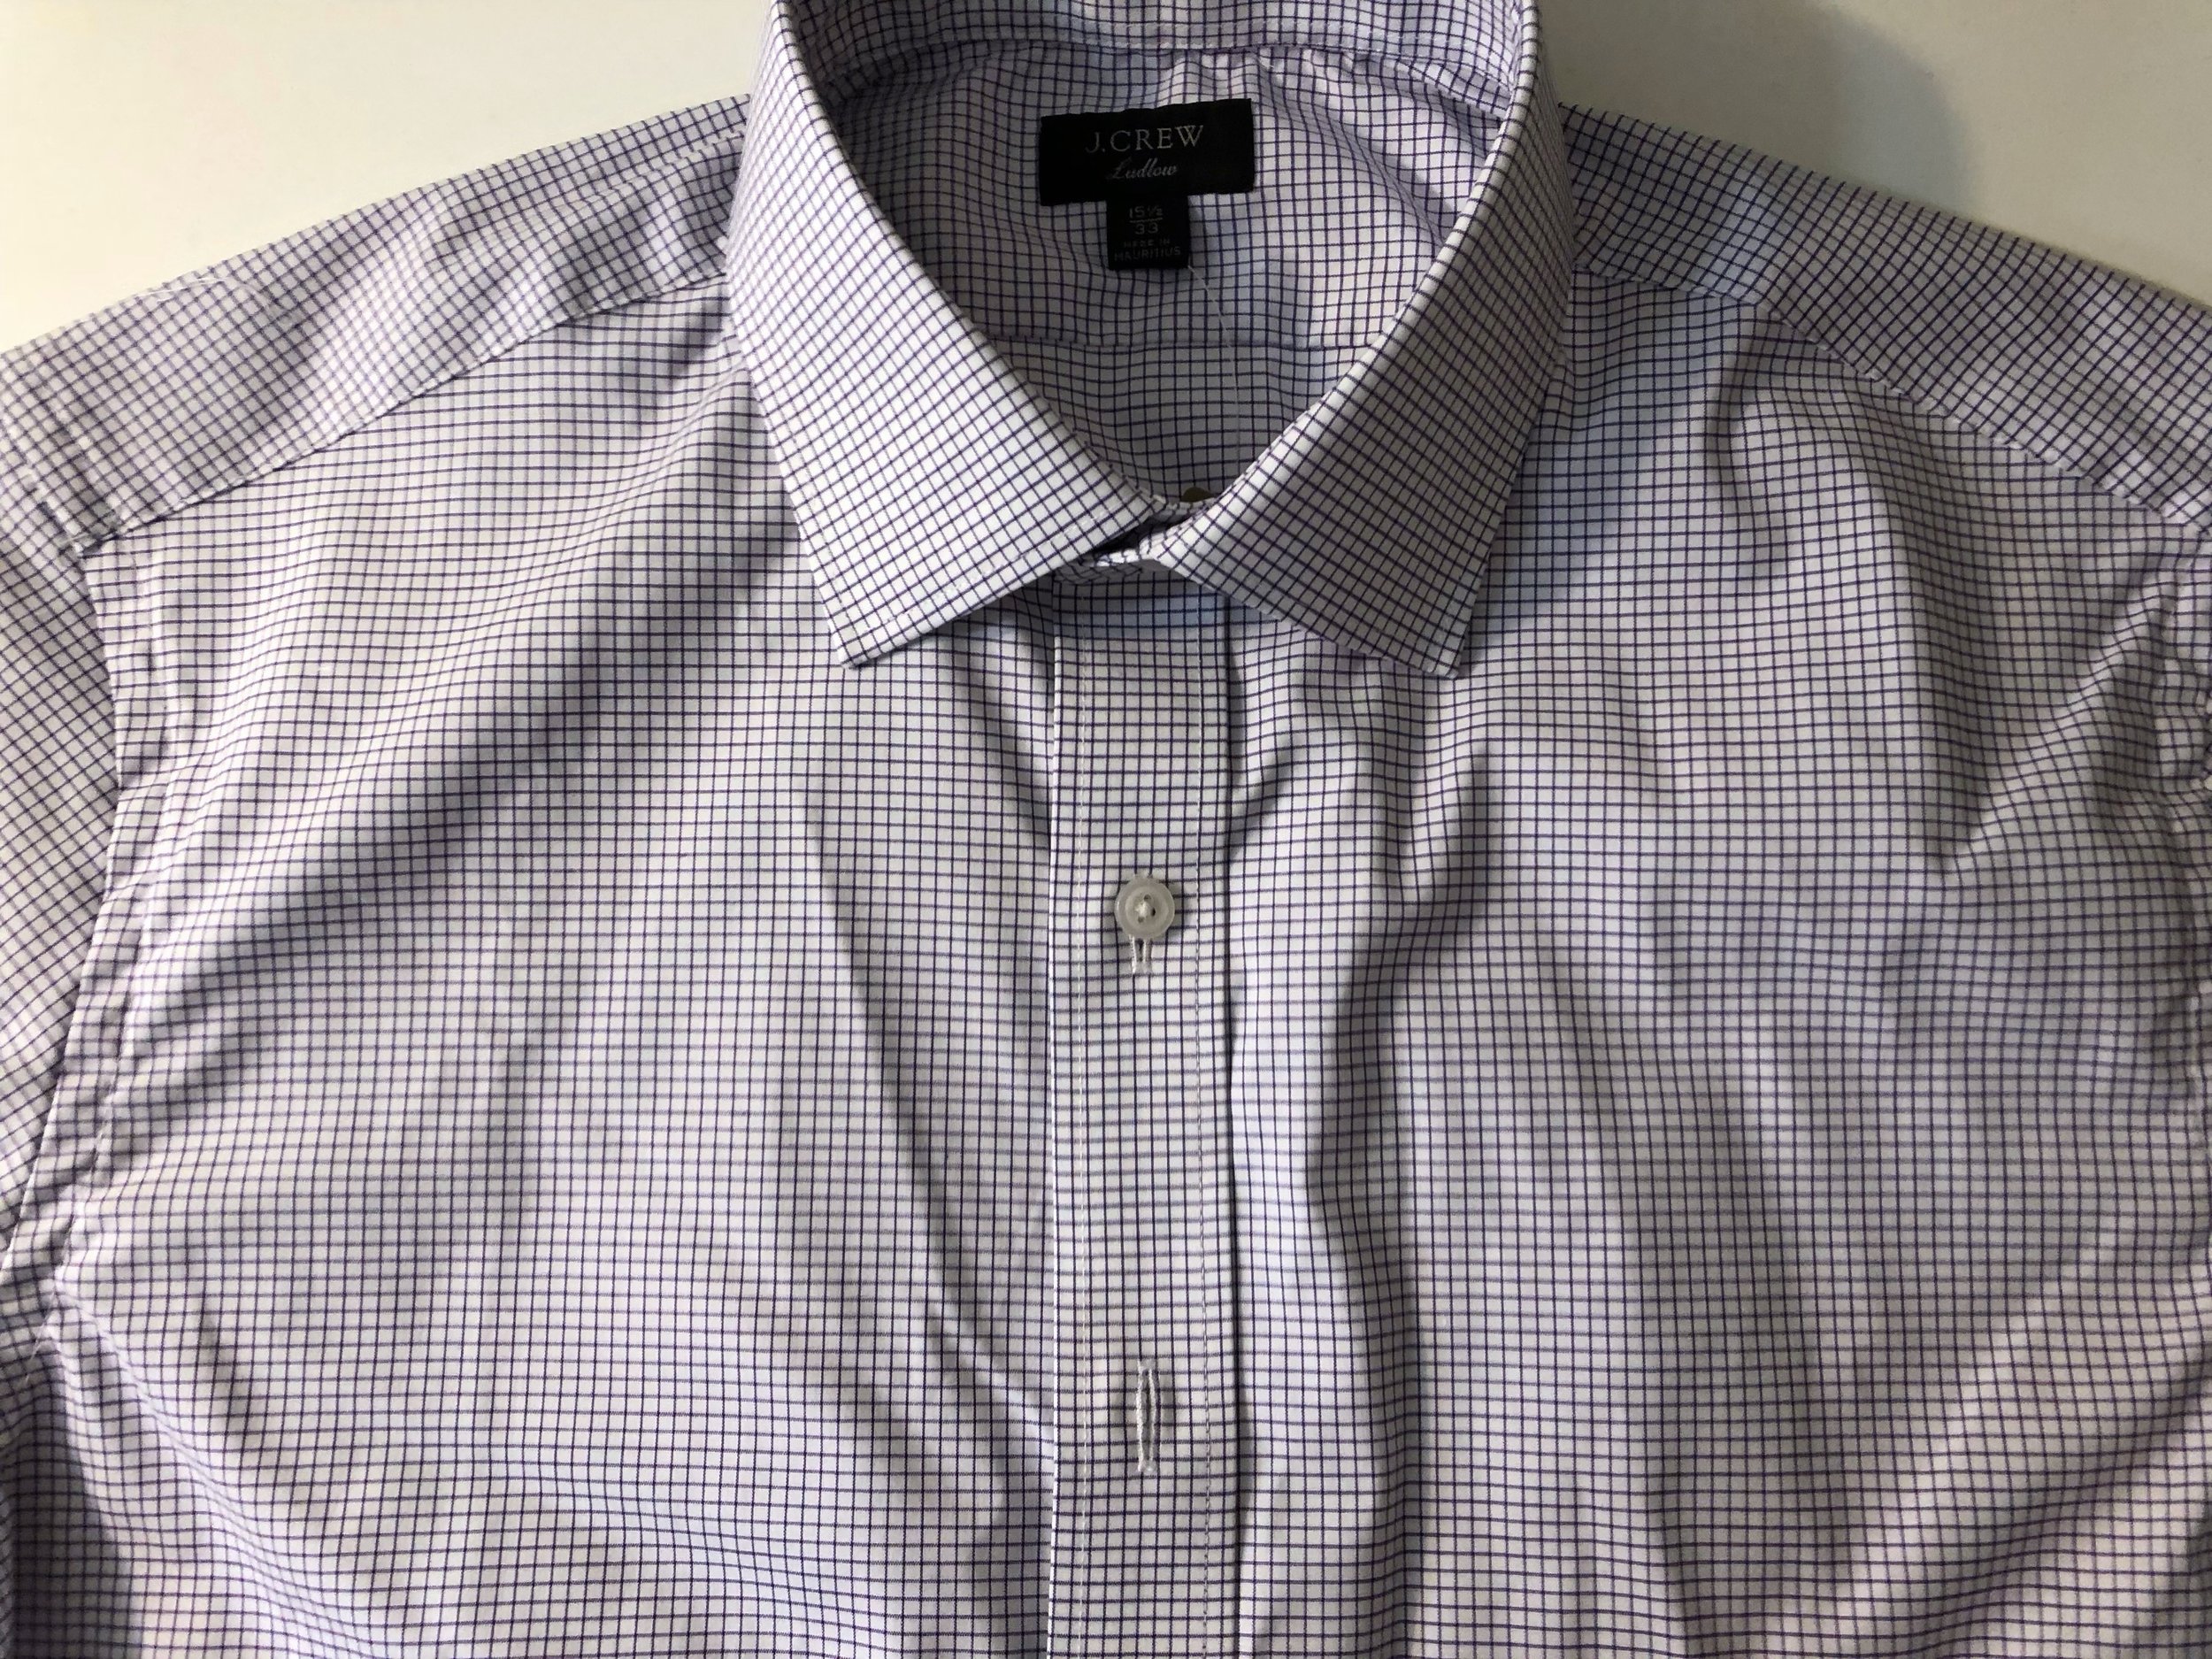 Crew Men's Ludlow Slim Fit Stretch Dress Shirt Size 16-34 NWT Easy Care Details about   J